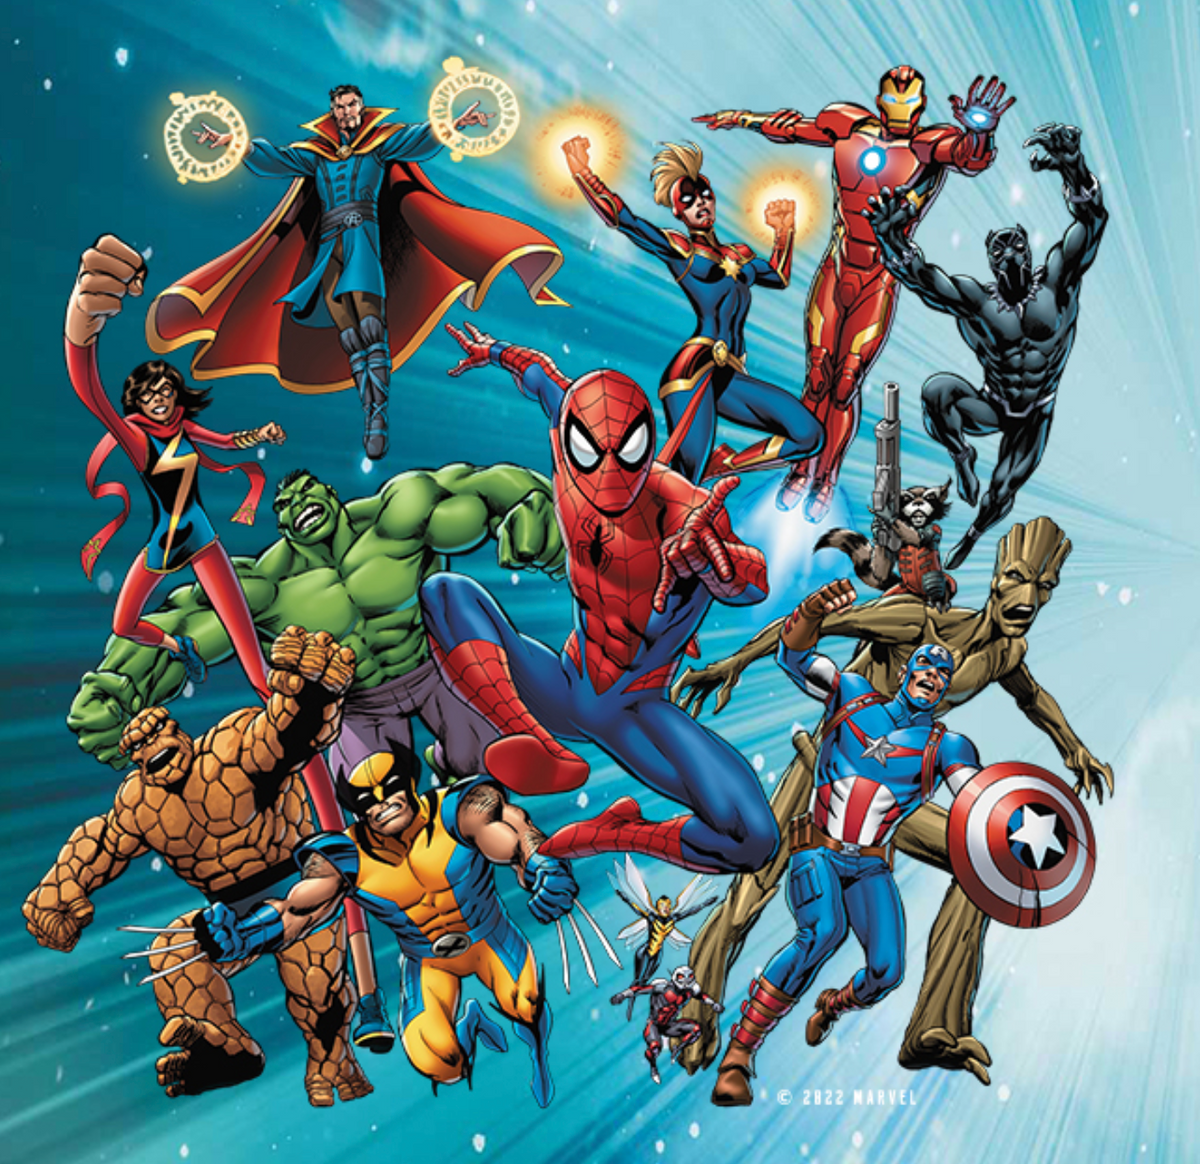 Marvel: Universe of Super Heroes at Oregon Museum of Science and